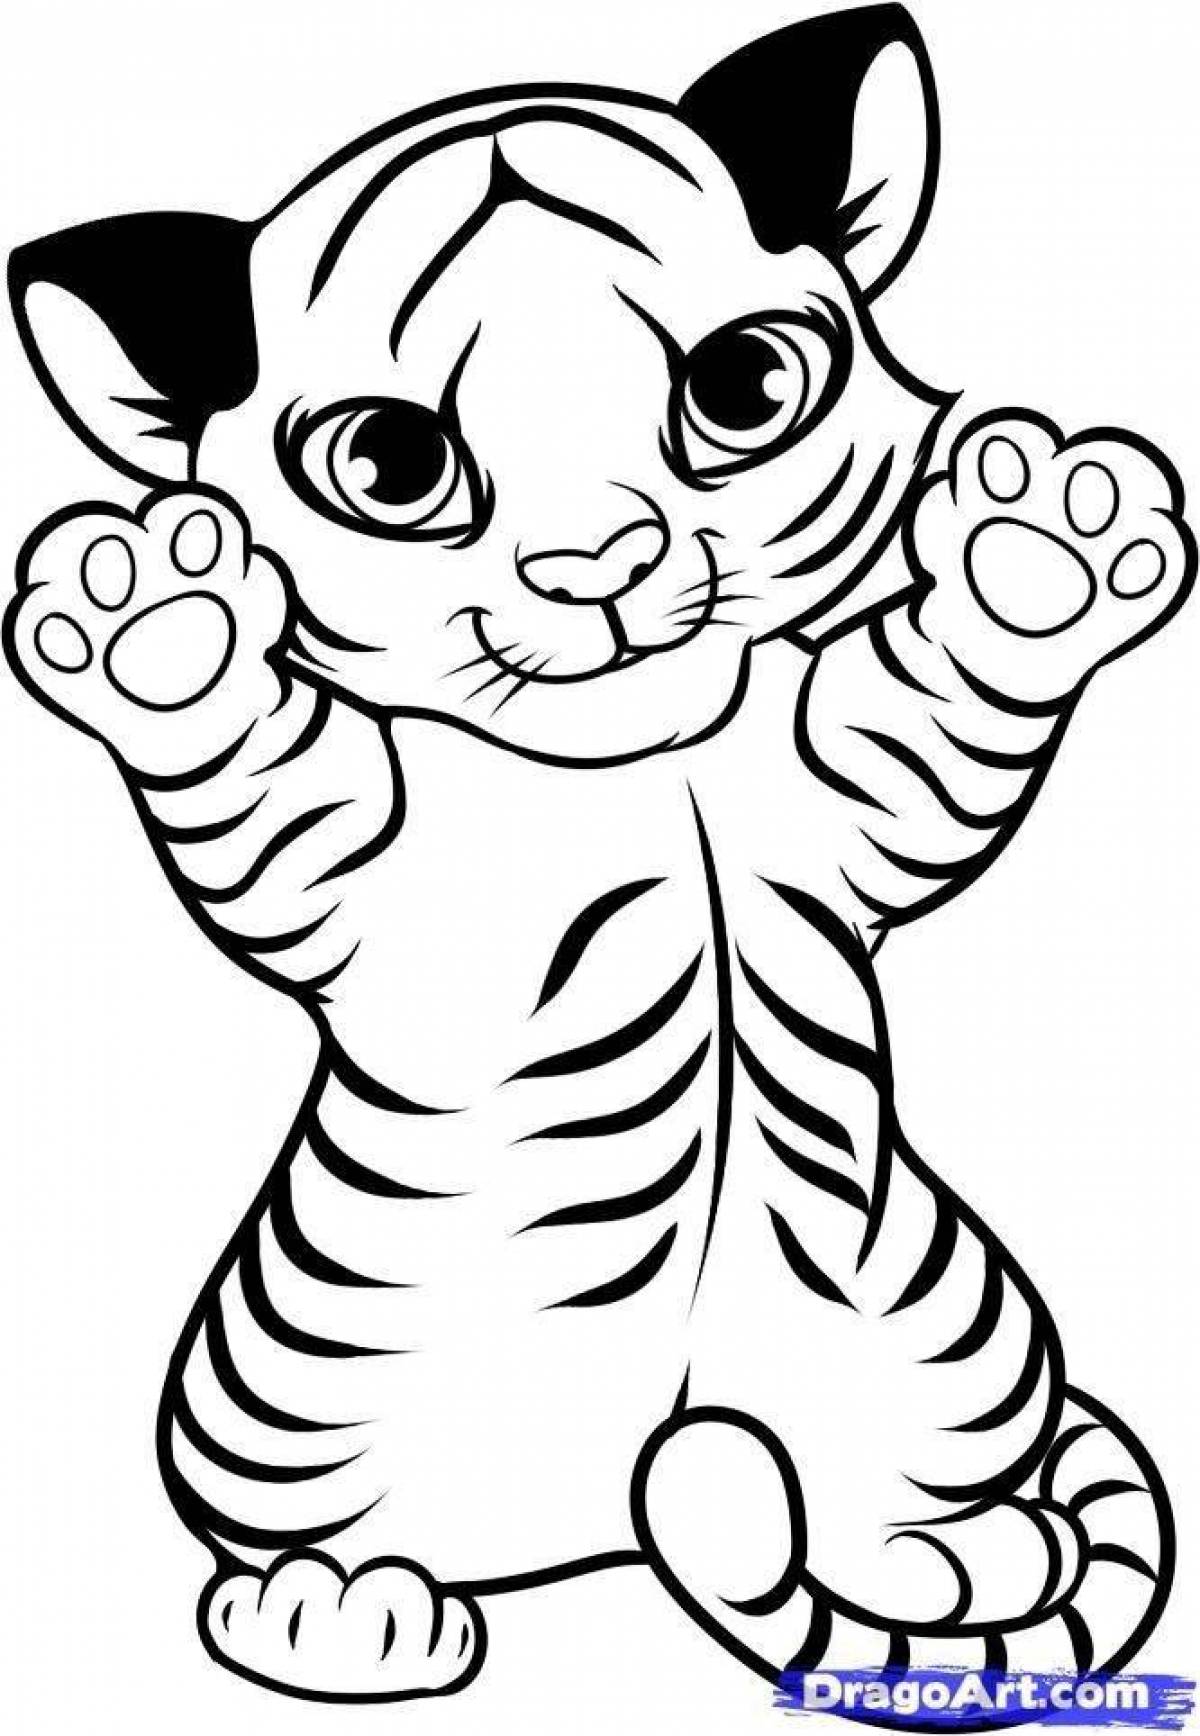 Dynamic tiger coloring page for kids